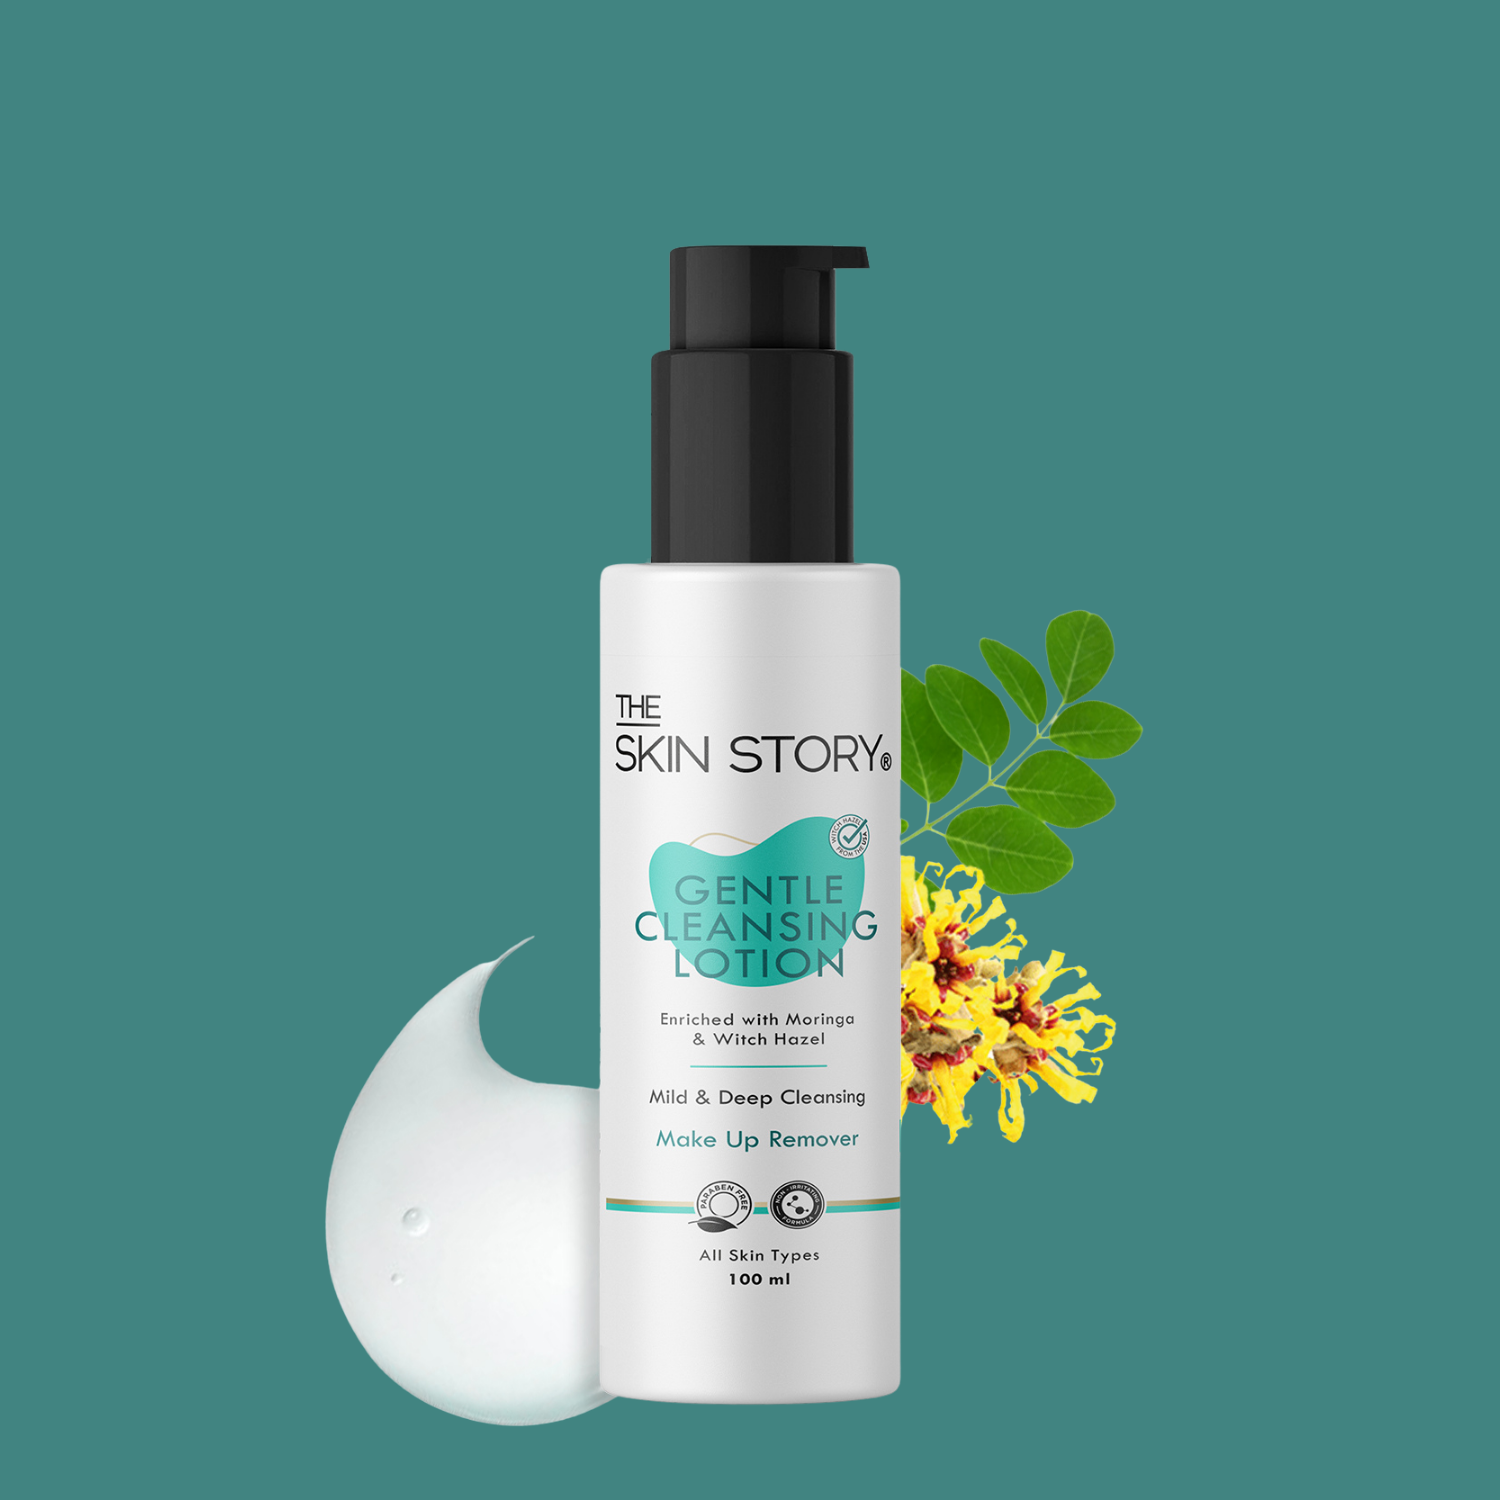 Gentle Cleansing Lotion | Intense Moisturisiation | Makeup Remover | Moringa & Shea Butter | All Skin Types | 100ml